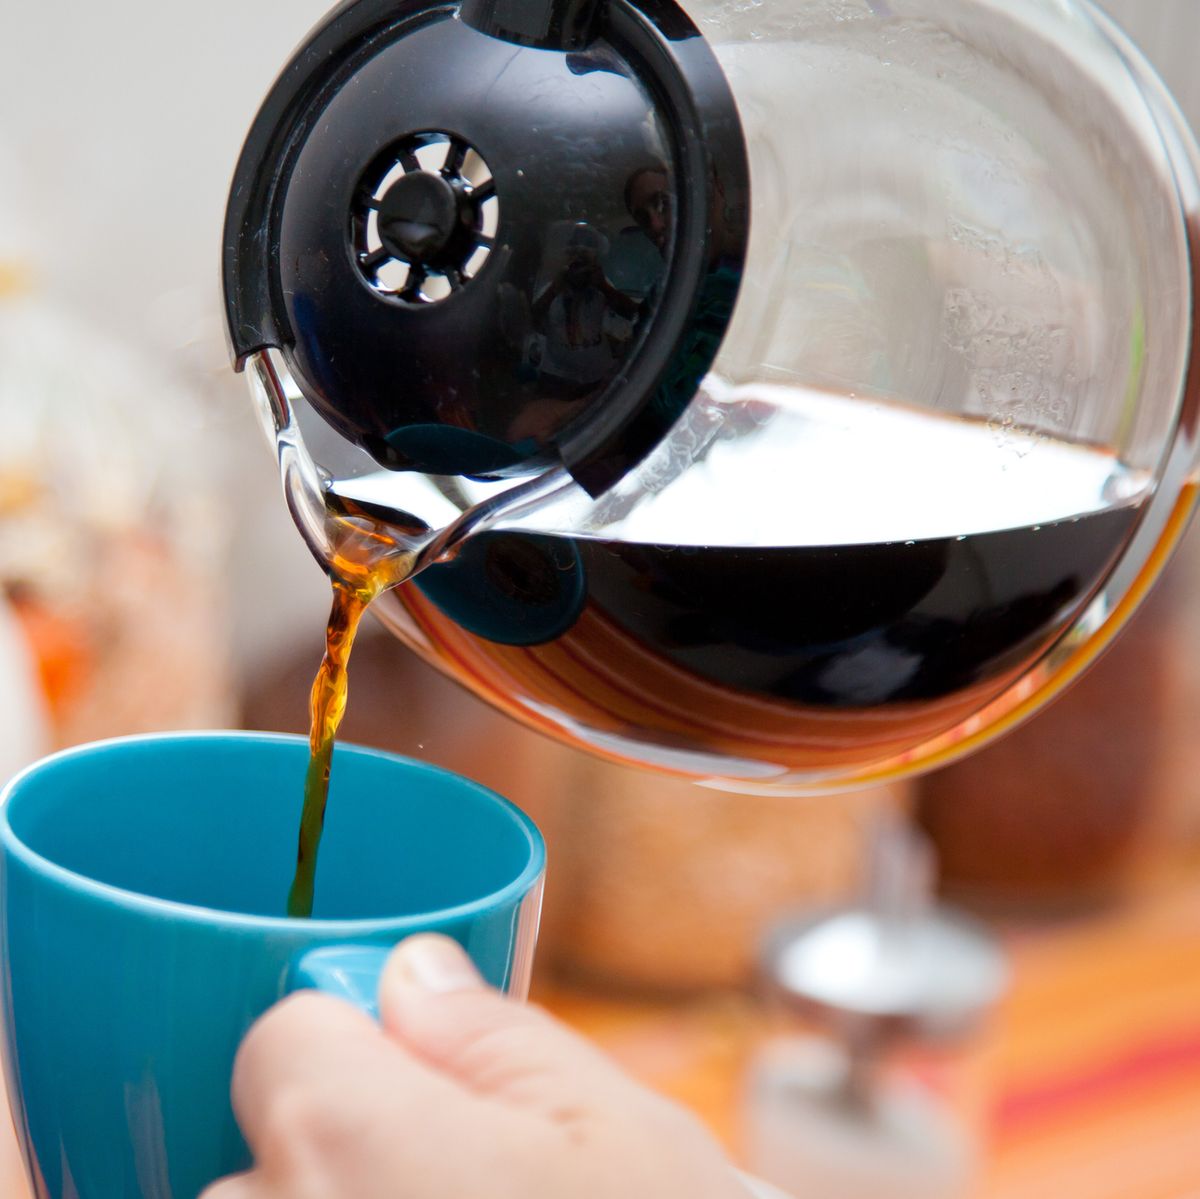 woman pouring coffee pot into a coffee mug in the kitchen